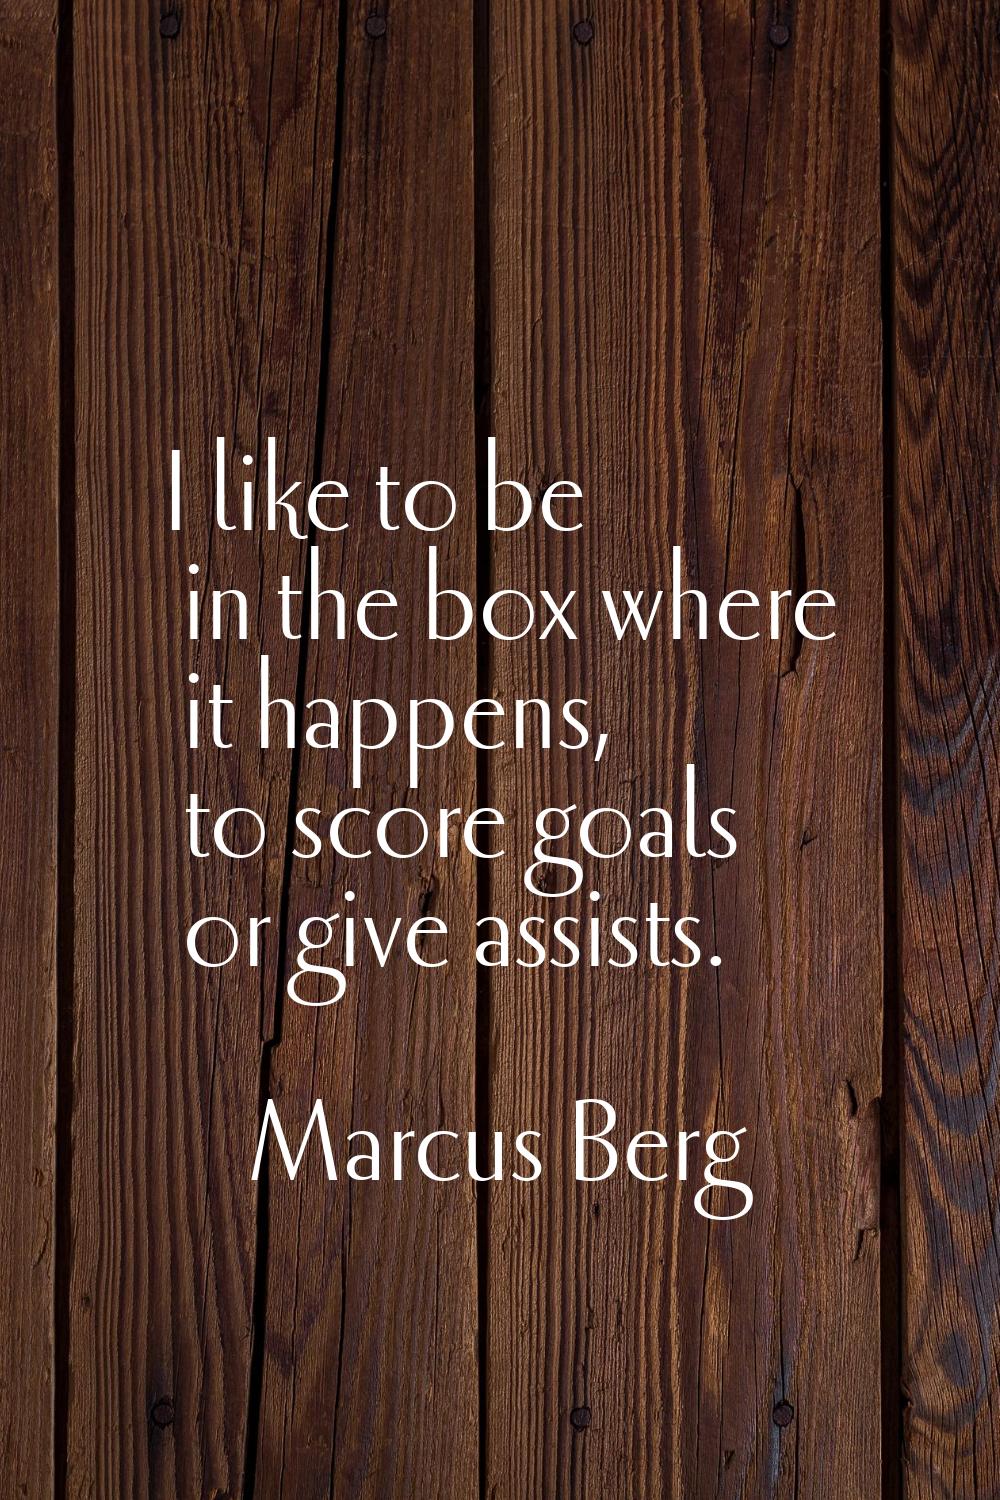 I like to be in the box where it happens, to score goals or give assists.